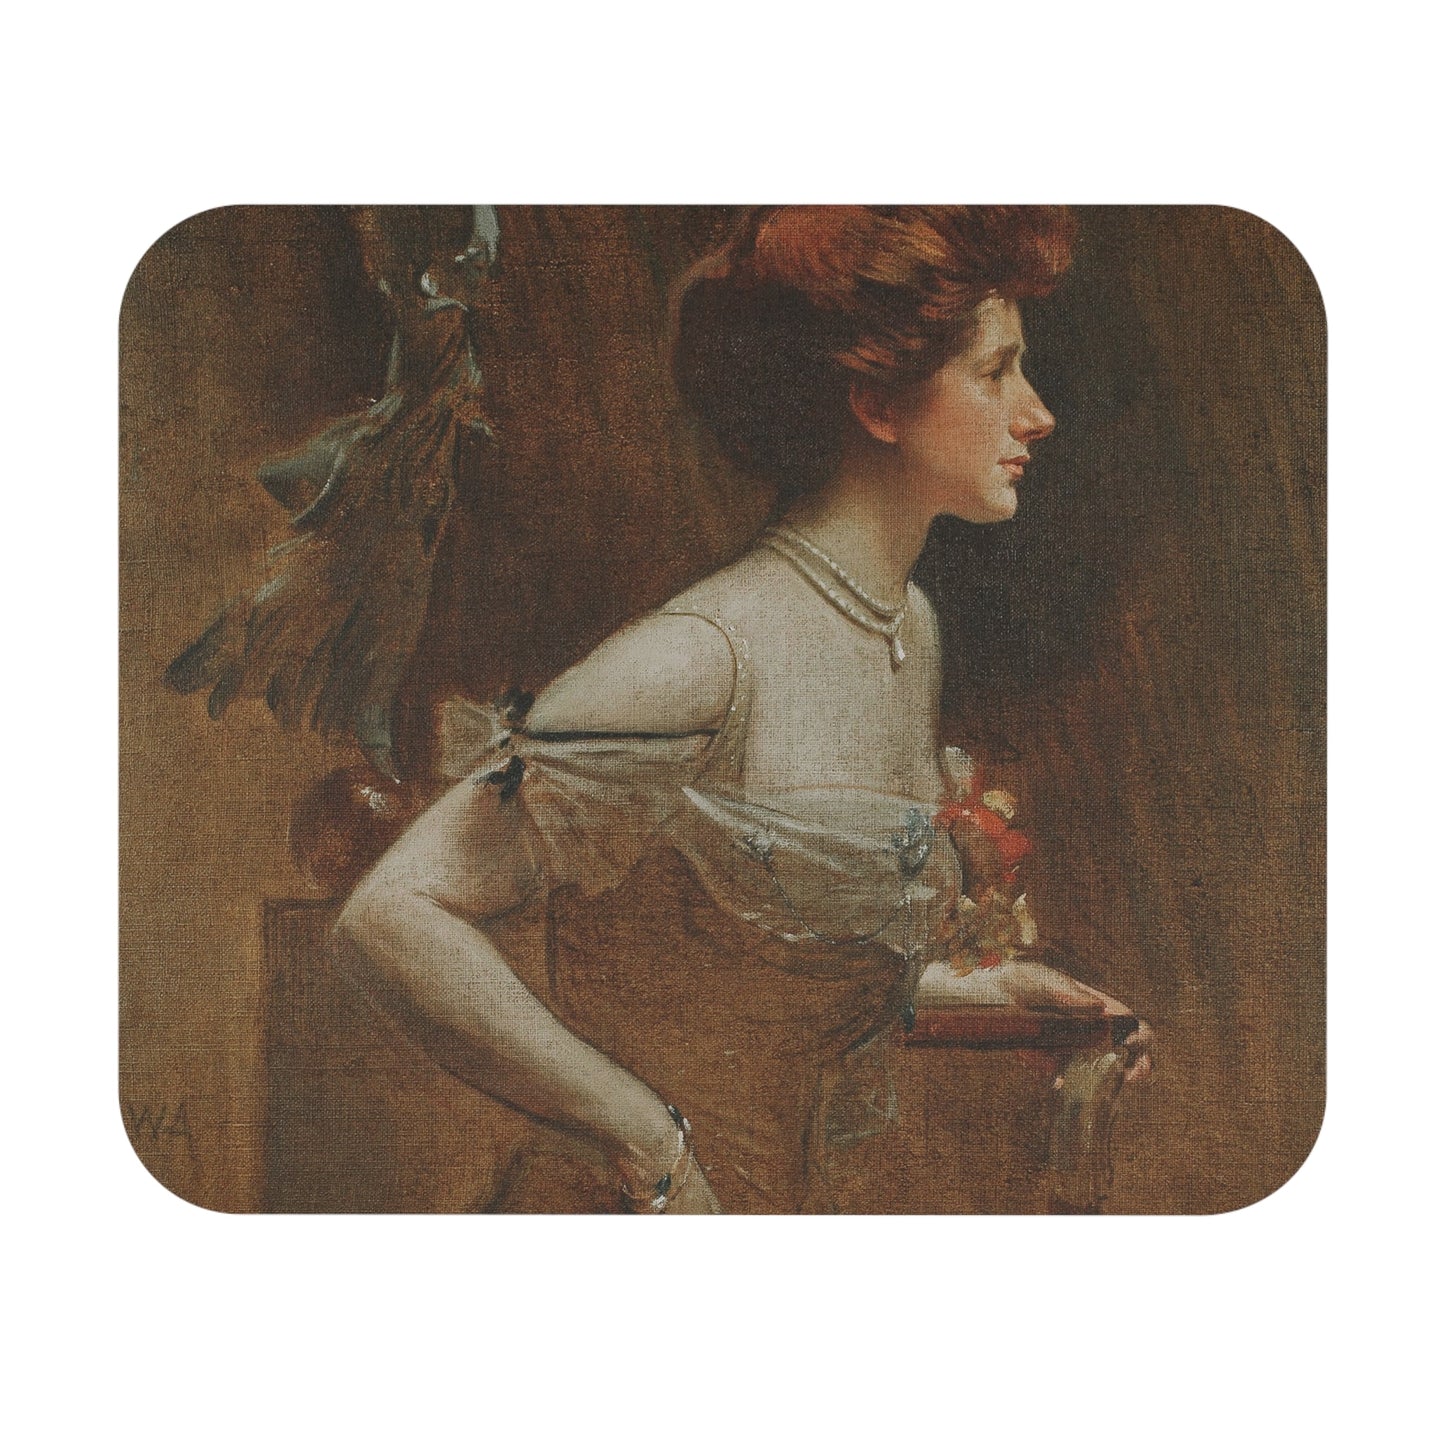 Victorian Portrait Mouse Pad featuring a woman in a tan elegant attire, perfect for desk and office decor.